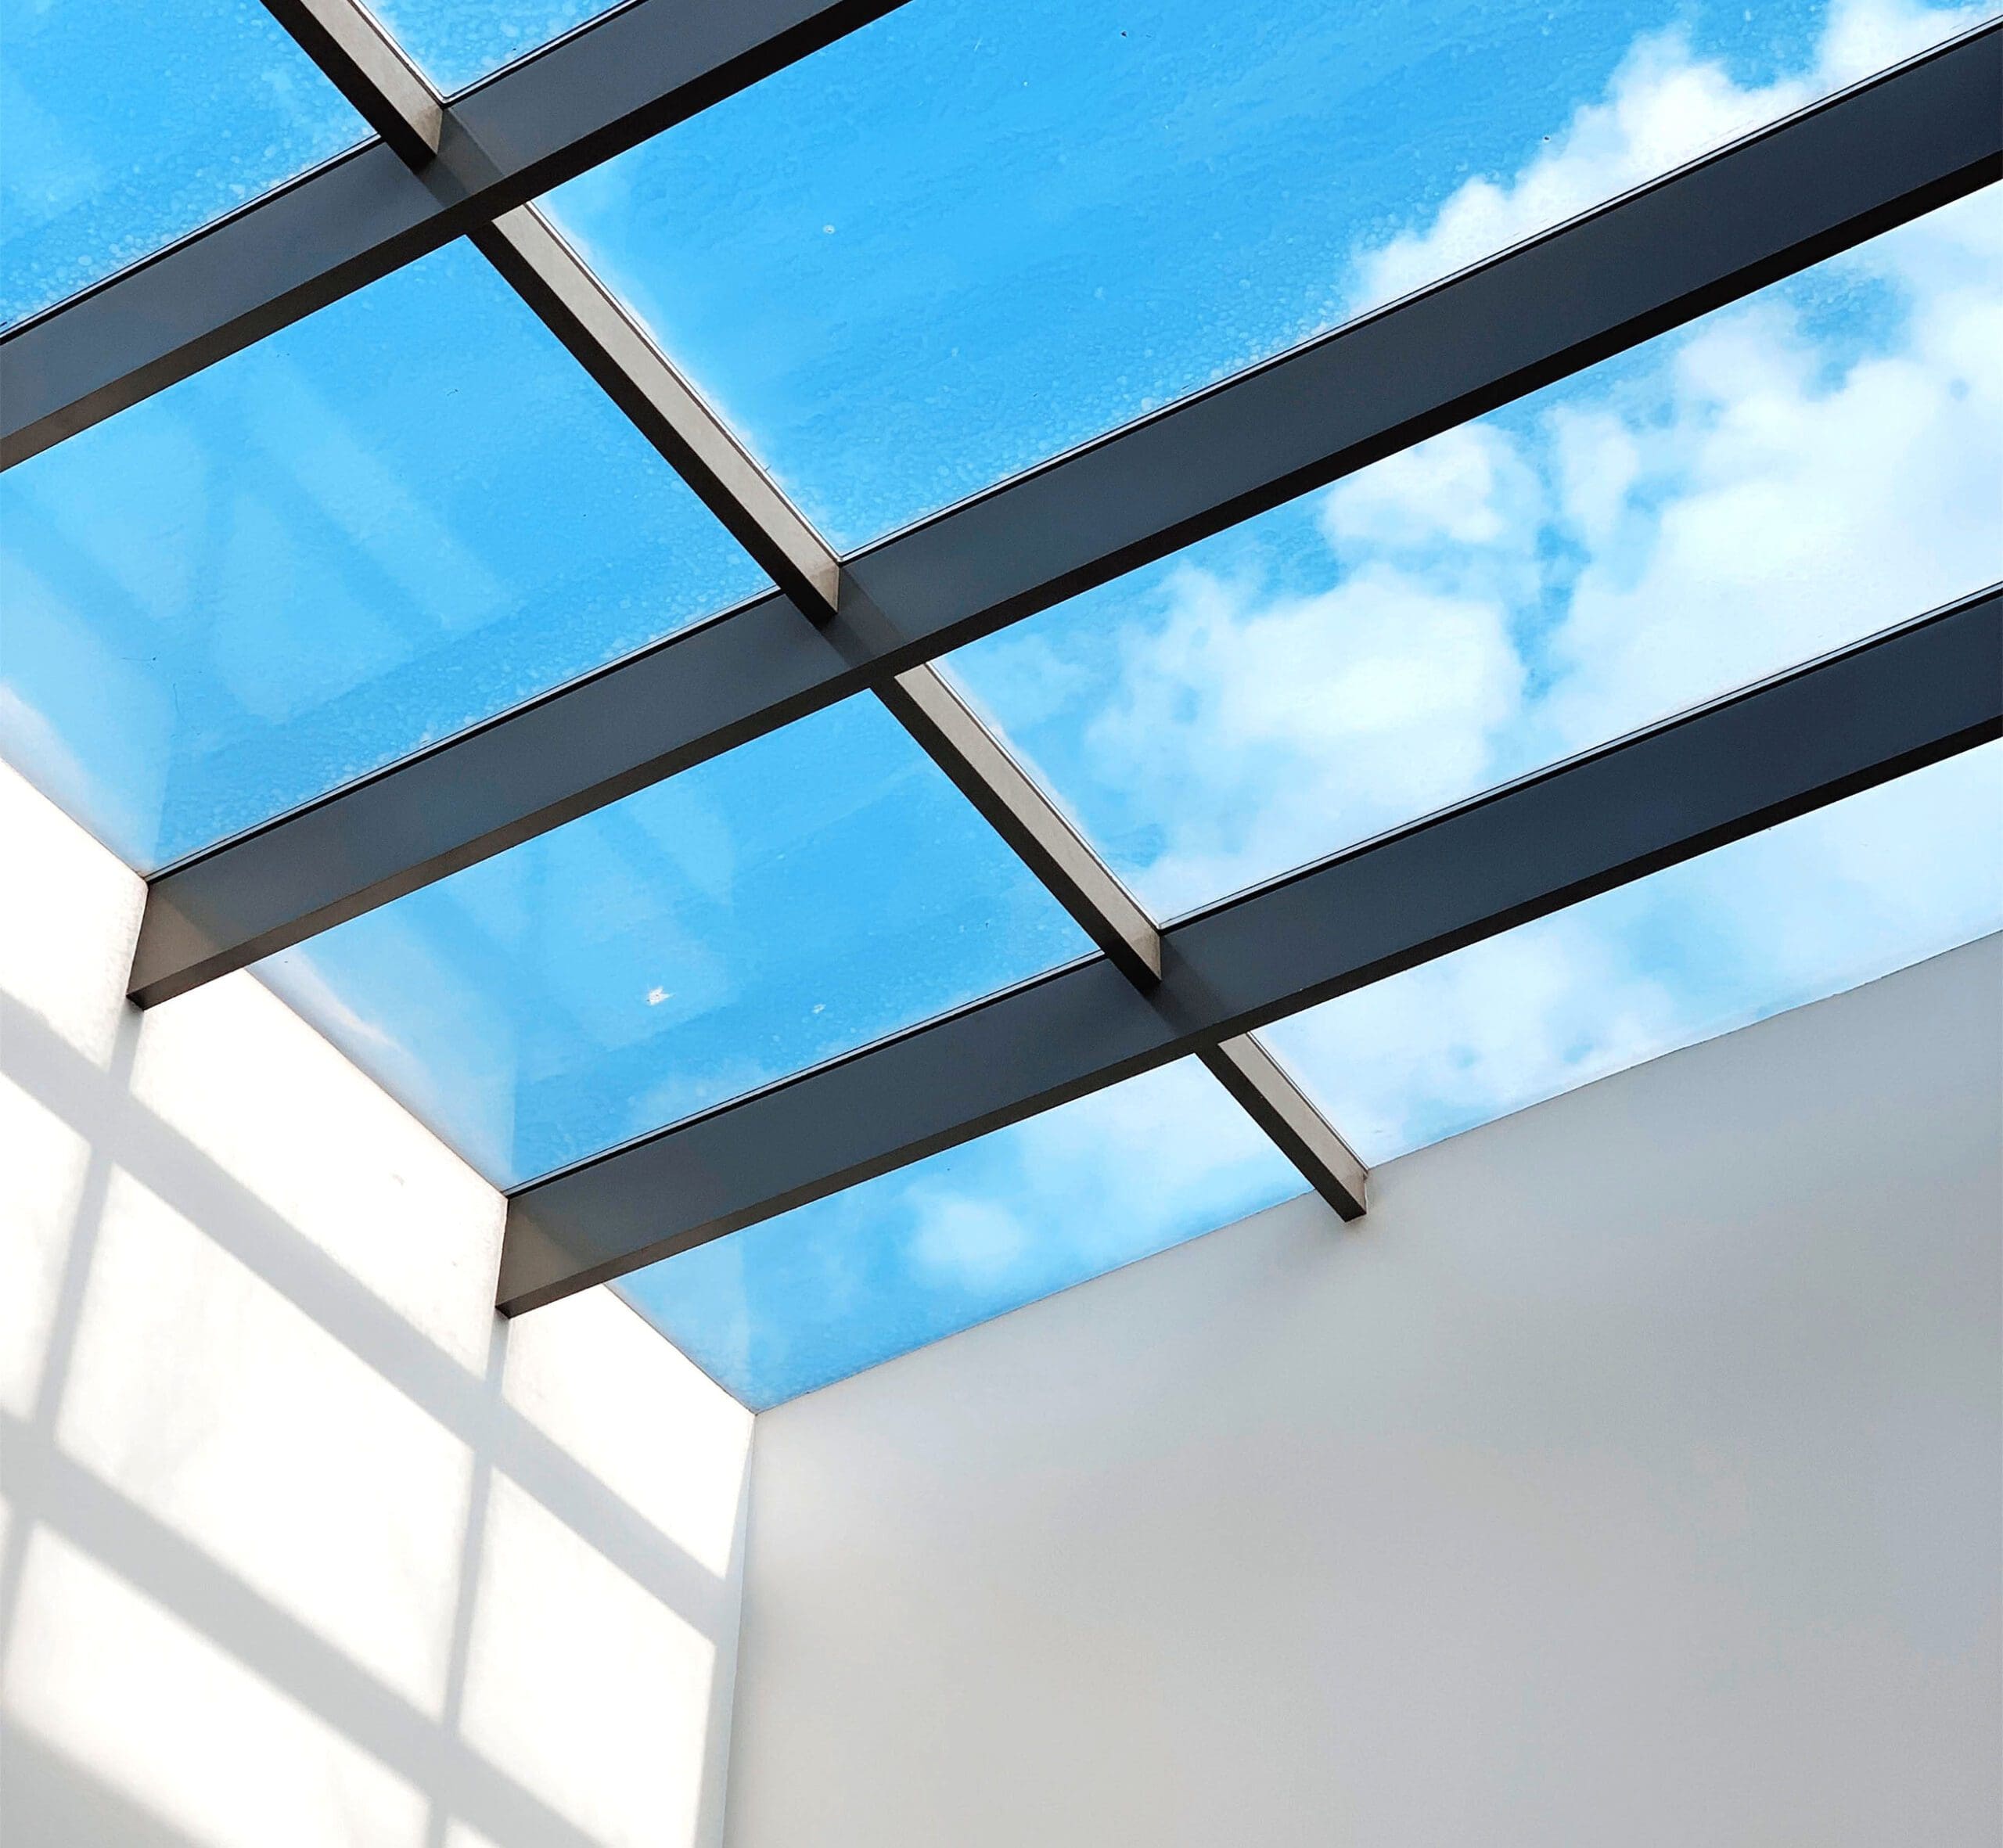 Tempered Glass for Buildings - Properties and Uses - The Constructor